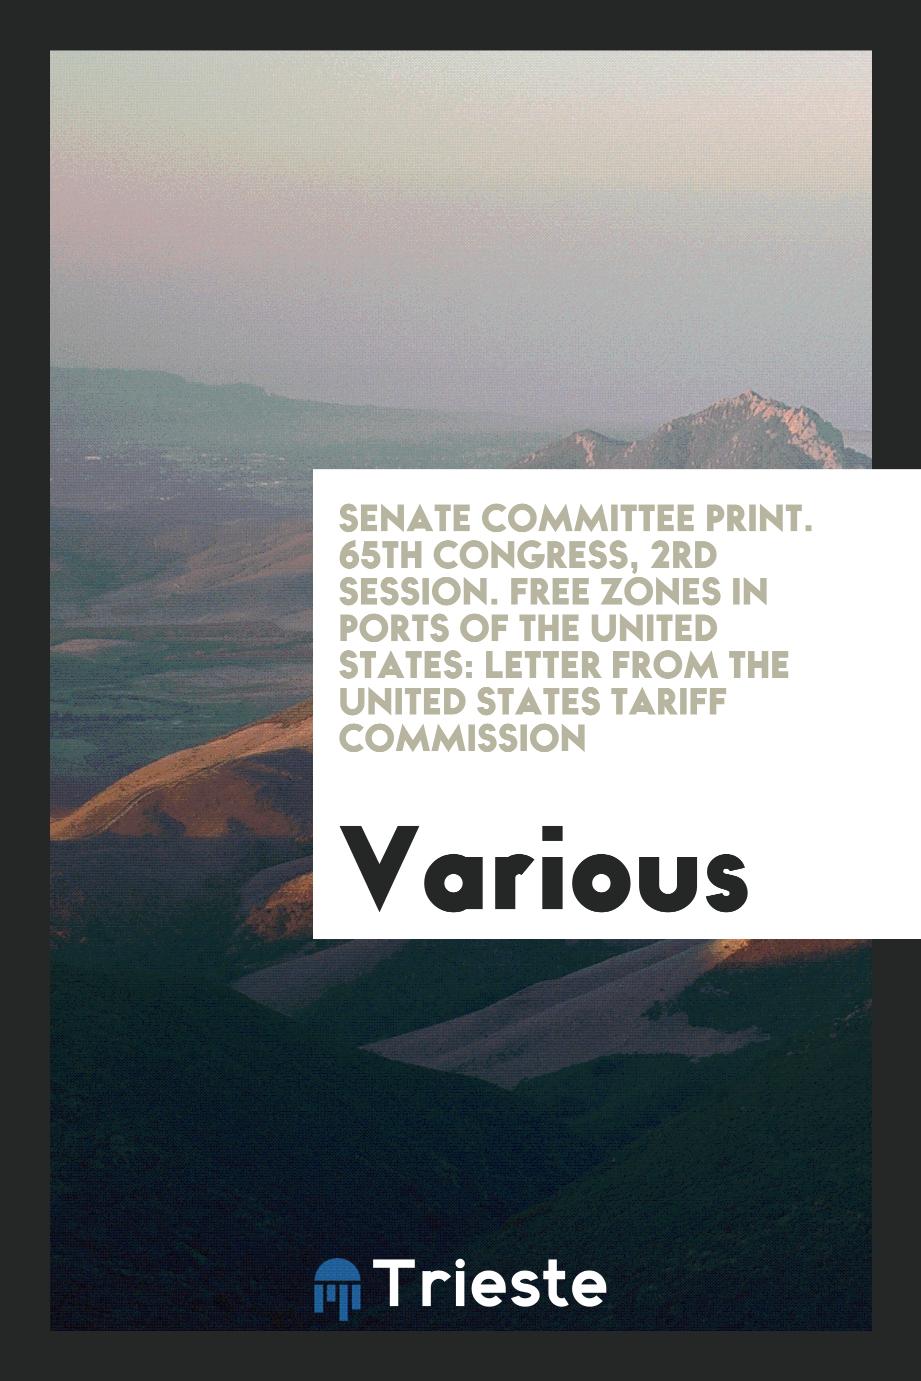 Senate Committee Print. 65th Congress, 2rd Session. Free Zones in Ports of the United States: Letter from the United States Tariff Commission